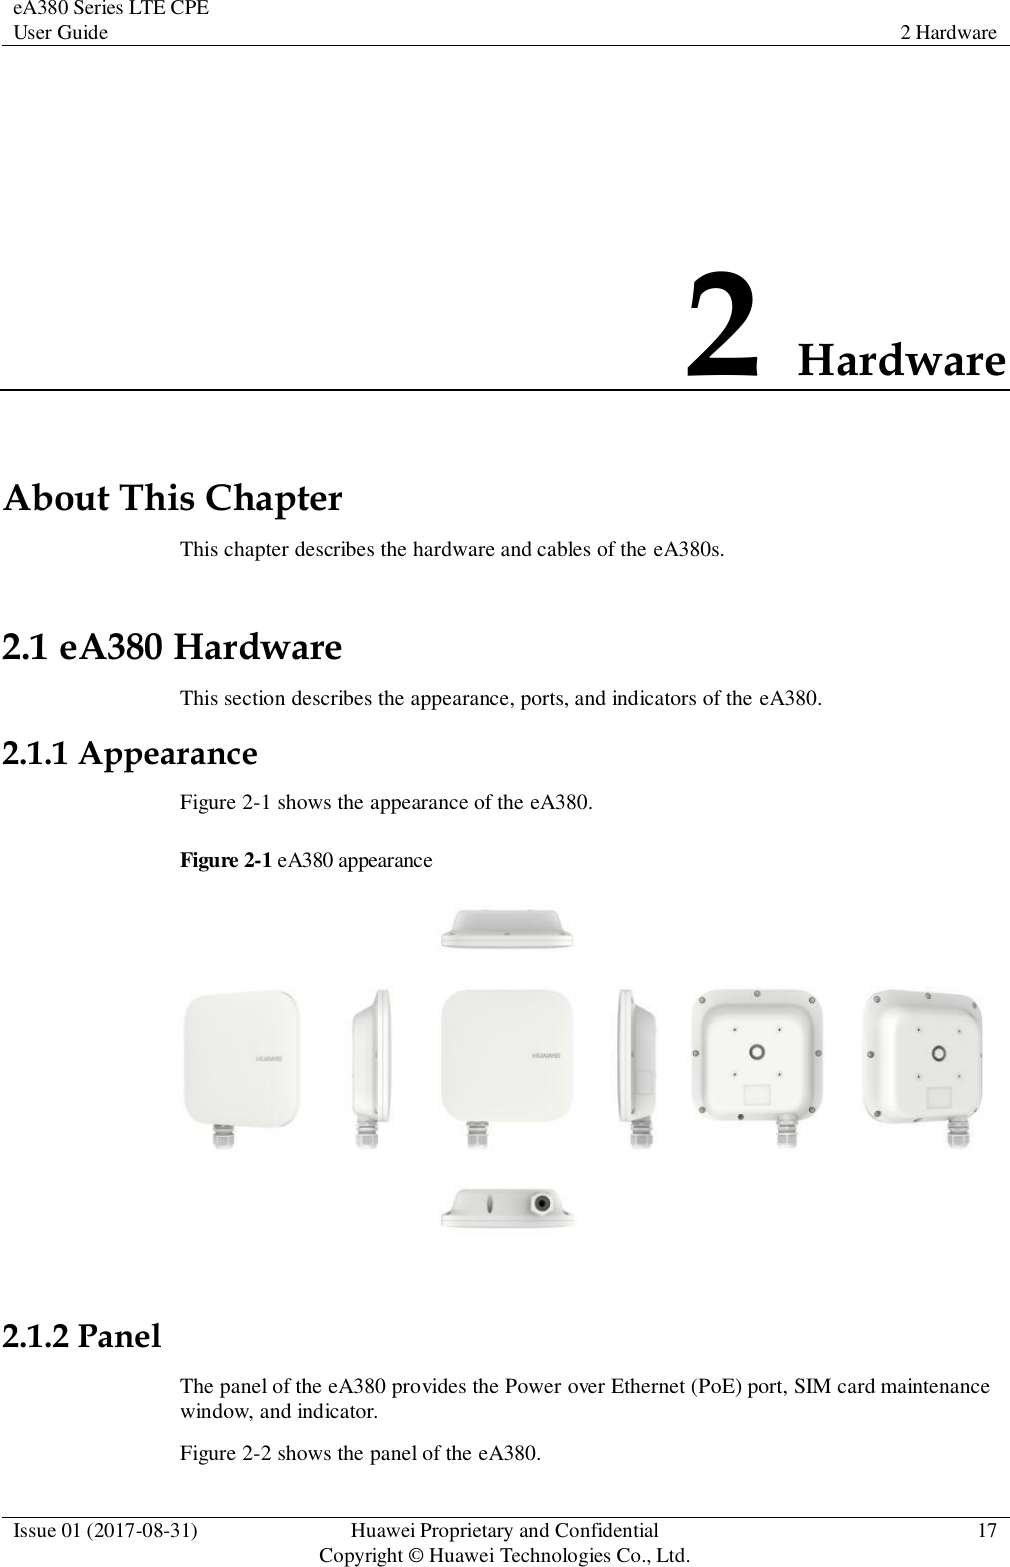 eA380 Series LTE CPE User Guide 2 Hardware  Issue 01 (2017-08-31) Huawei Proprietary and Confidential                                     Copyright © Huawei Technologies Co., Ltd. 17  2 Hardware About This Chapter This chapter describes the hardware and cables of the eA380s. 2.1 eA380 Hardware This section describes the appearance, ports, and indicators of the eA380. 2.1.1 Appearance Figure 2-1 shows the appearance of the eA380. Figure 2-1 eA380 appearance   2.1.2 Panel The panel of the eA380 provides the Power over Ethernet (PoE) port, SIM card maintenance window, and indicator. Figure 2-2 shows the panel of the eA380. 